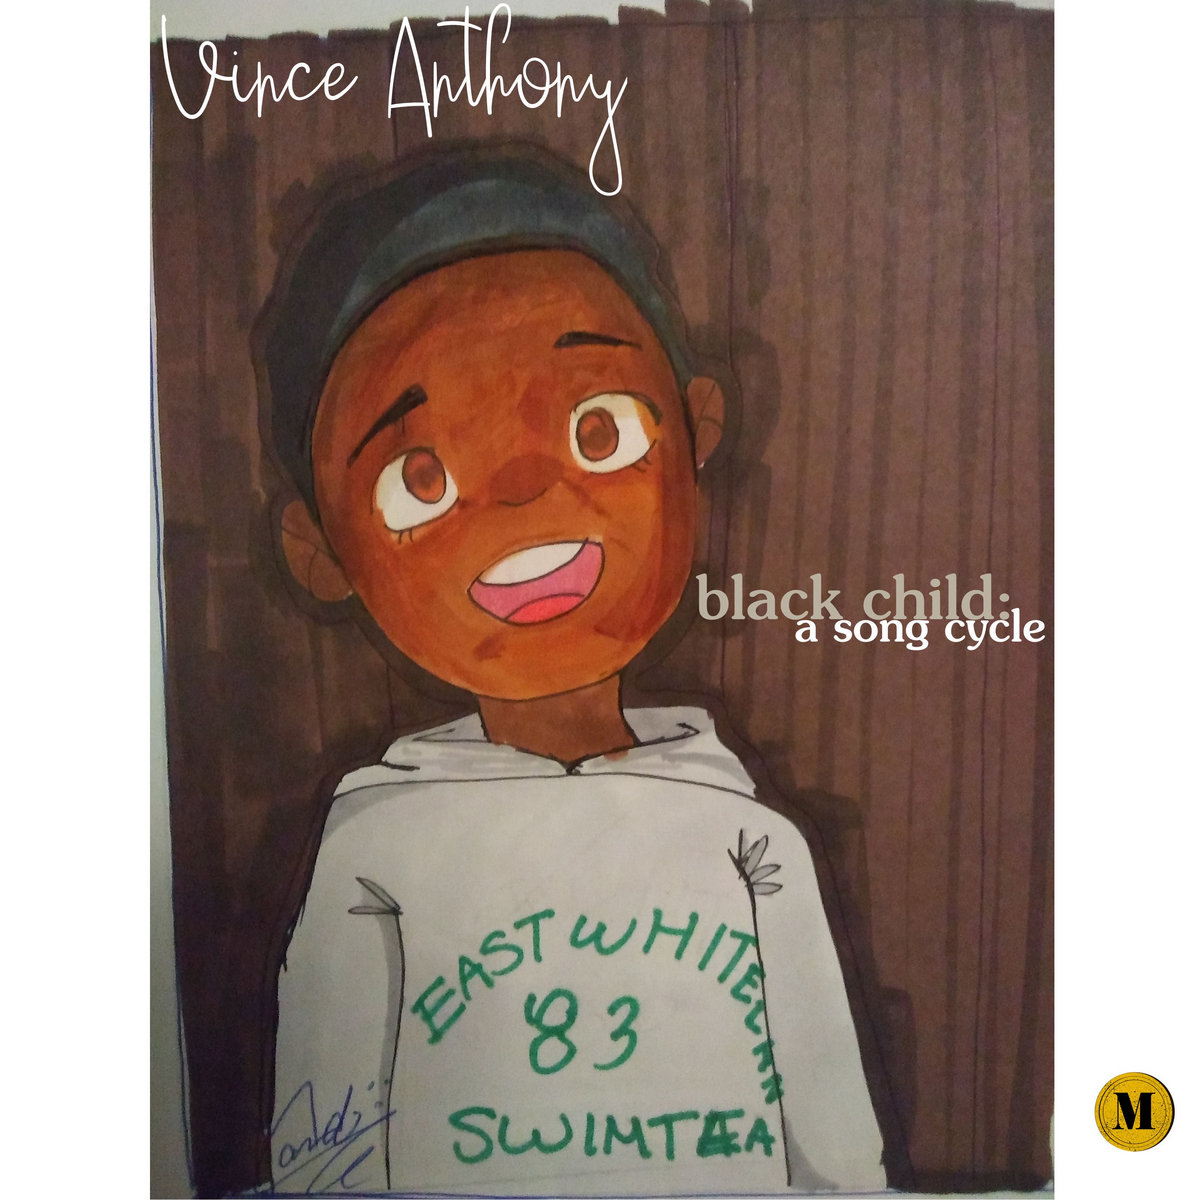 Black Child: A Song Cycle | Vince Anthony | Turtle Studios